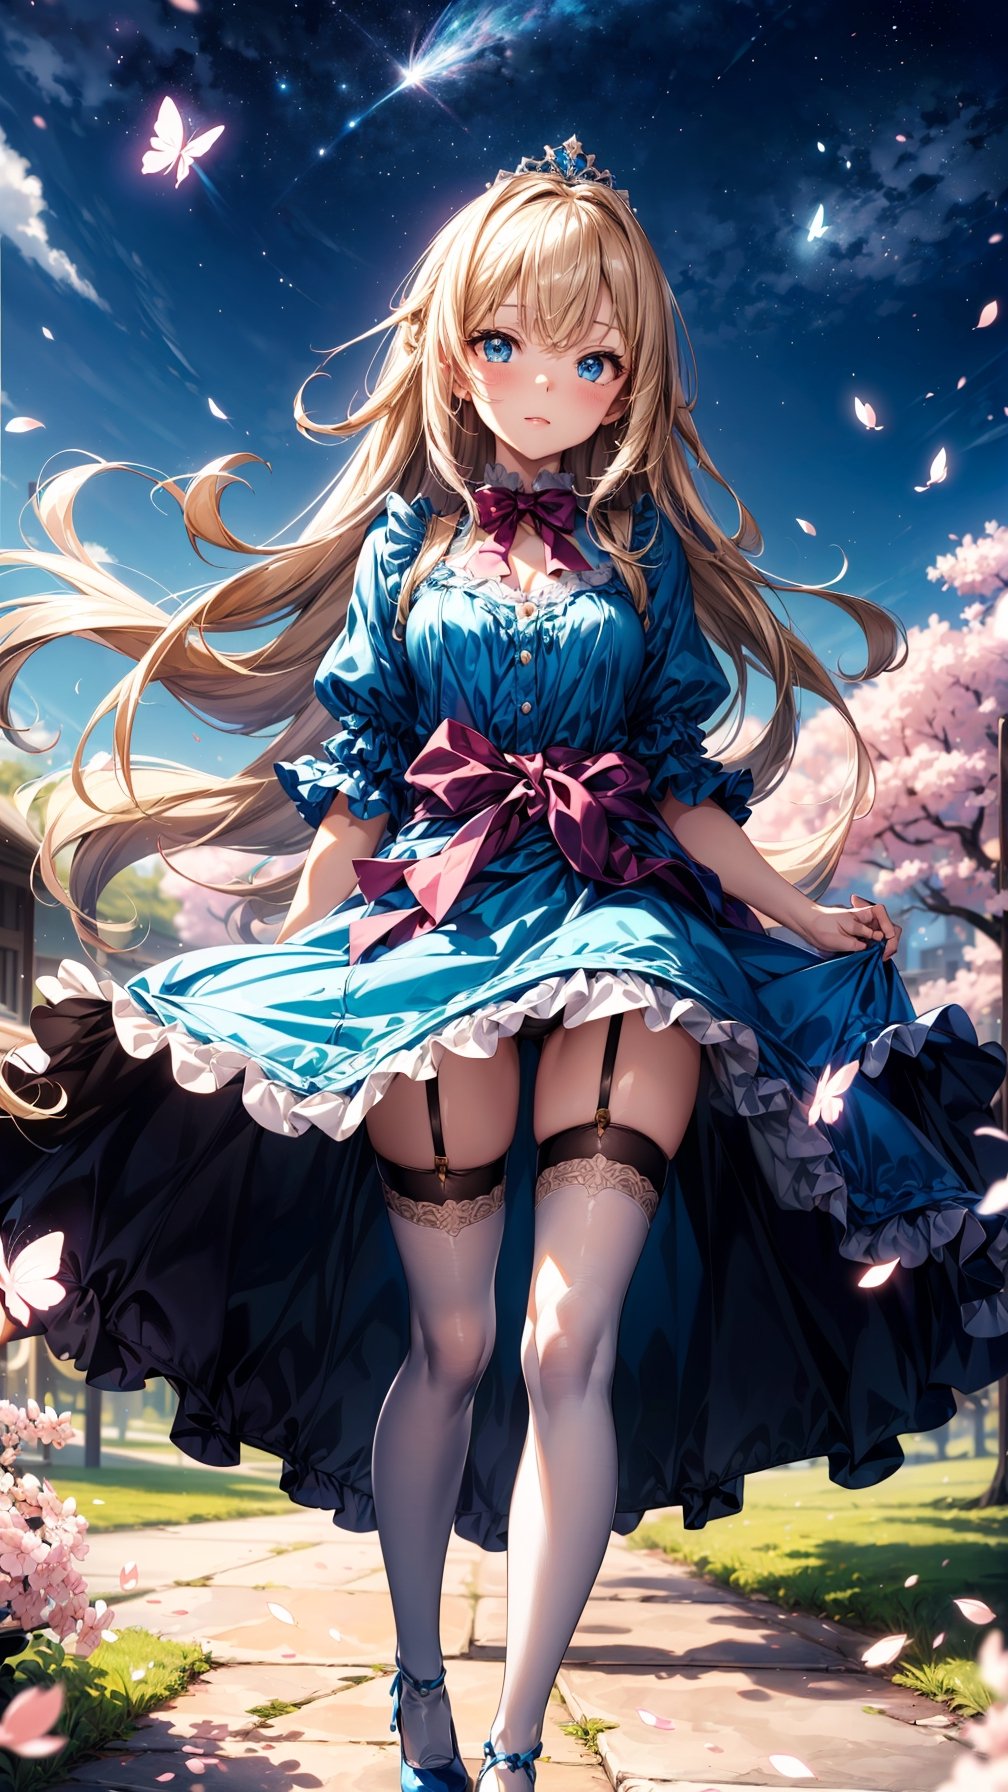 (best quality, masterpiece, illustration, designer, lighting), (extremely detailed CG 8k wallpaper unit), (detailed and expressive eyes), detailed particles, beautiful lighting, a cute girl, long blonde hair, wearing a teddy bear tiara, donning a beautiful blue and white dress with ruffles and lace, sheer pink stockings, transparent aquamarine crystal shoes, bows around her waist (Alice in Wonderland), butterflies around, (Pixiv anime style),(manga style), ((floating in sky)), flowy dress, ((cherry blossoms falling around her)), colorful, short_skirt,sky, stars, celestial body, atmosphere, (dreamy world:1.4)